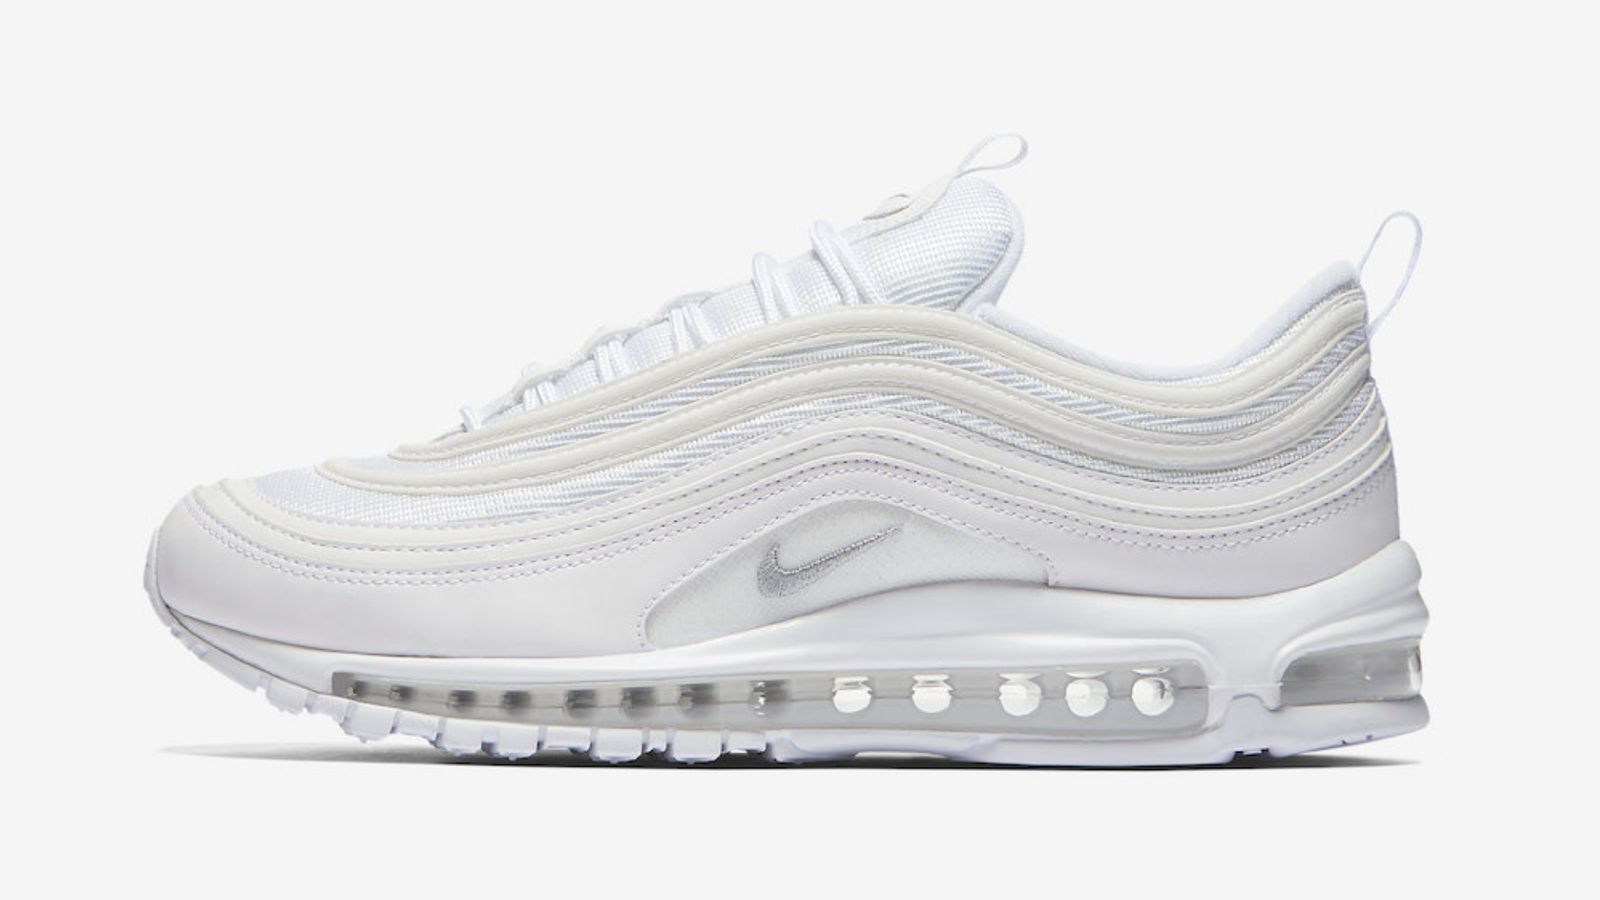 Nike Air Max 97 "Triple White" product image of an all-white low-top with touches of grey details.